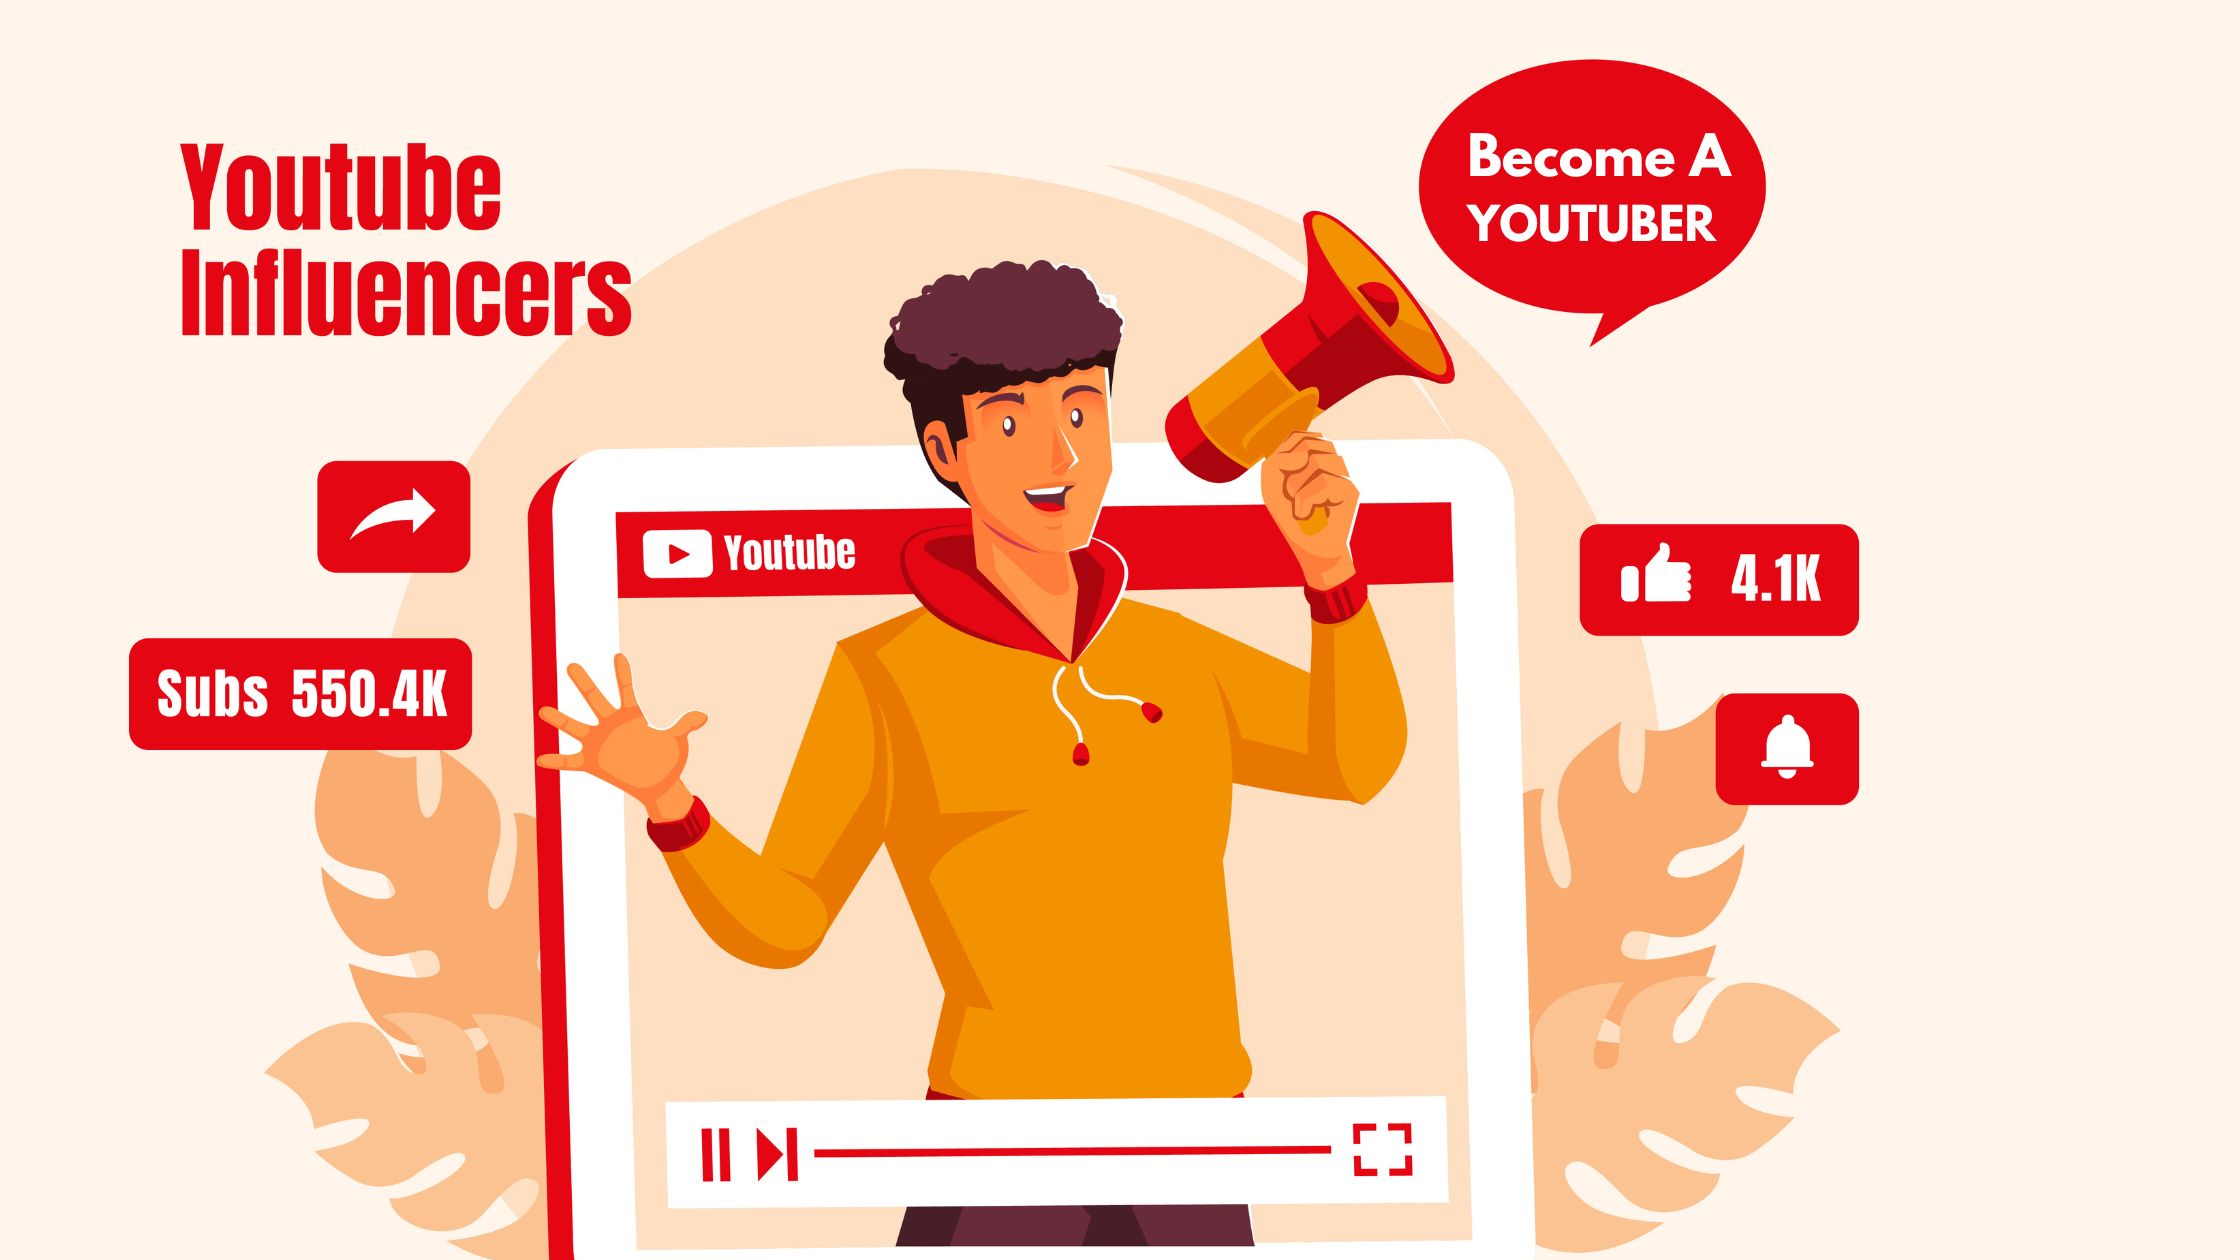 How To Become A YouTuber